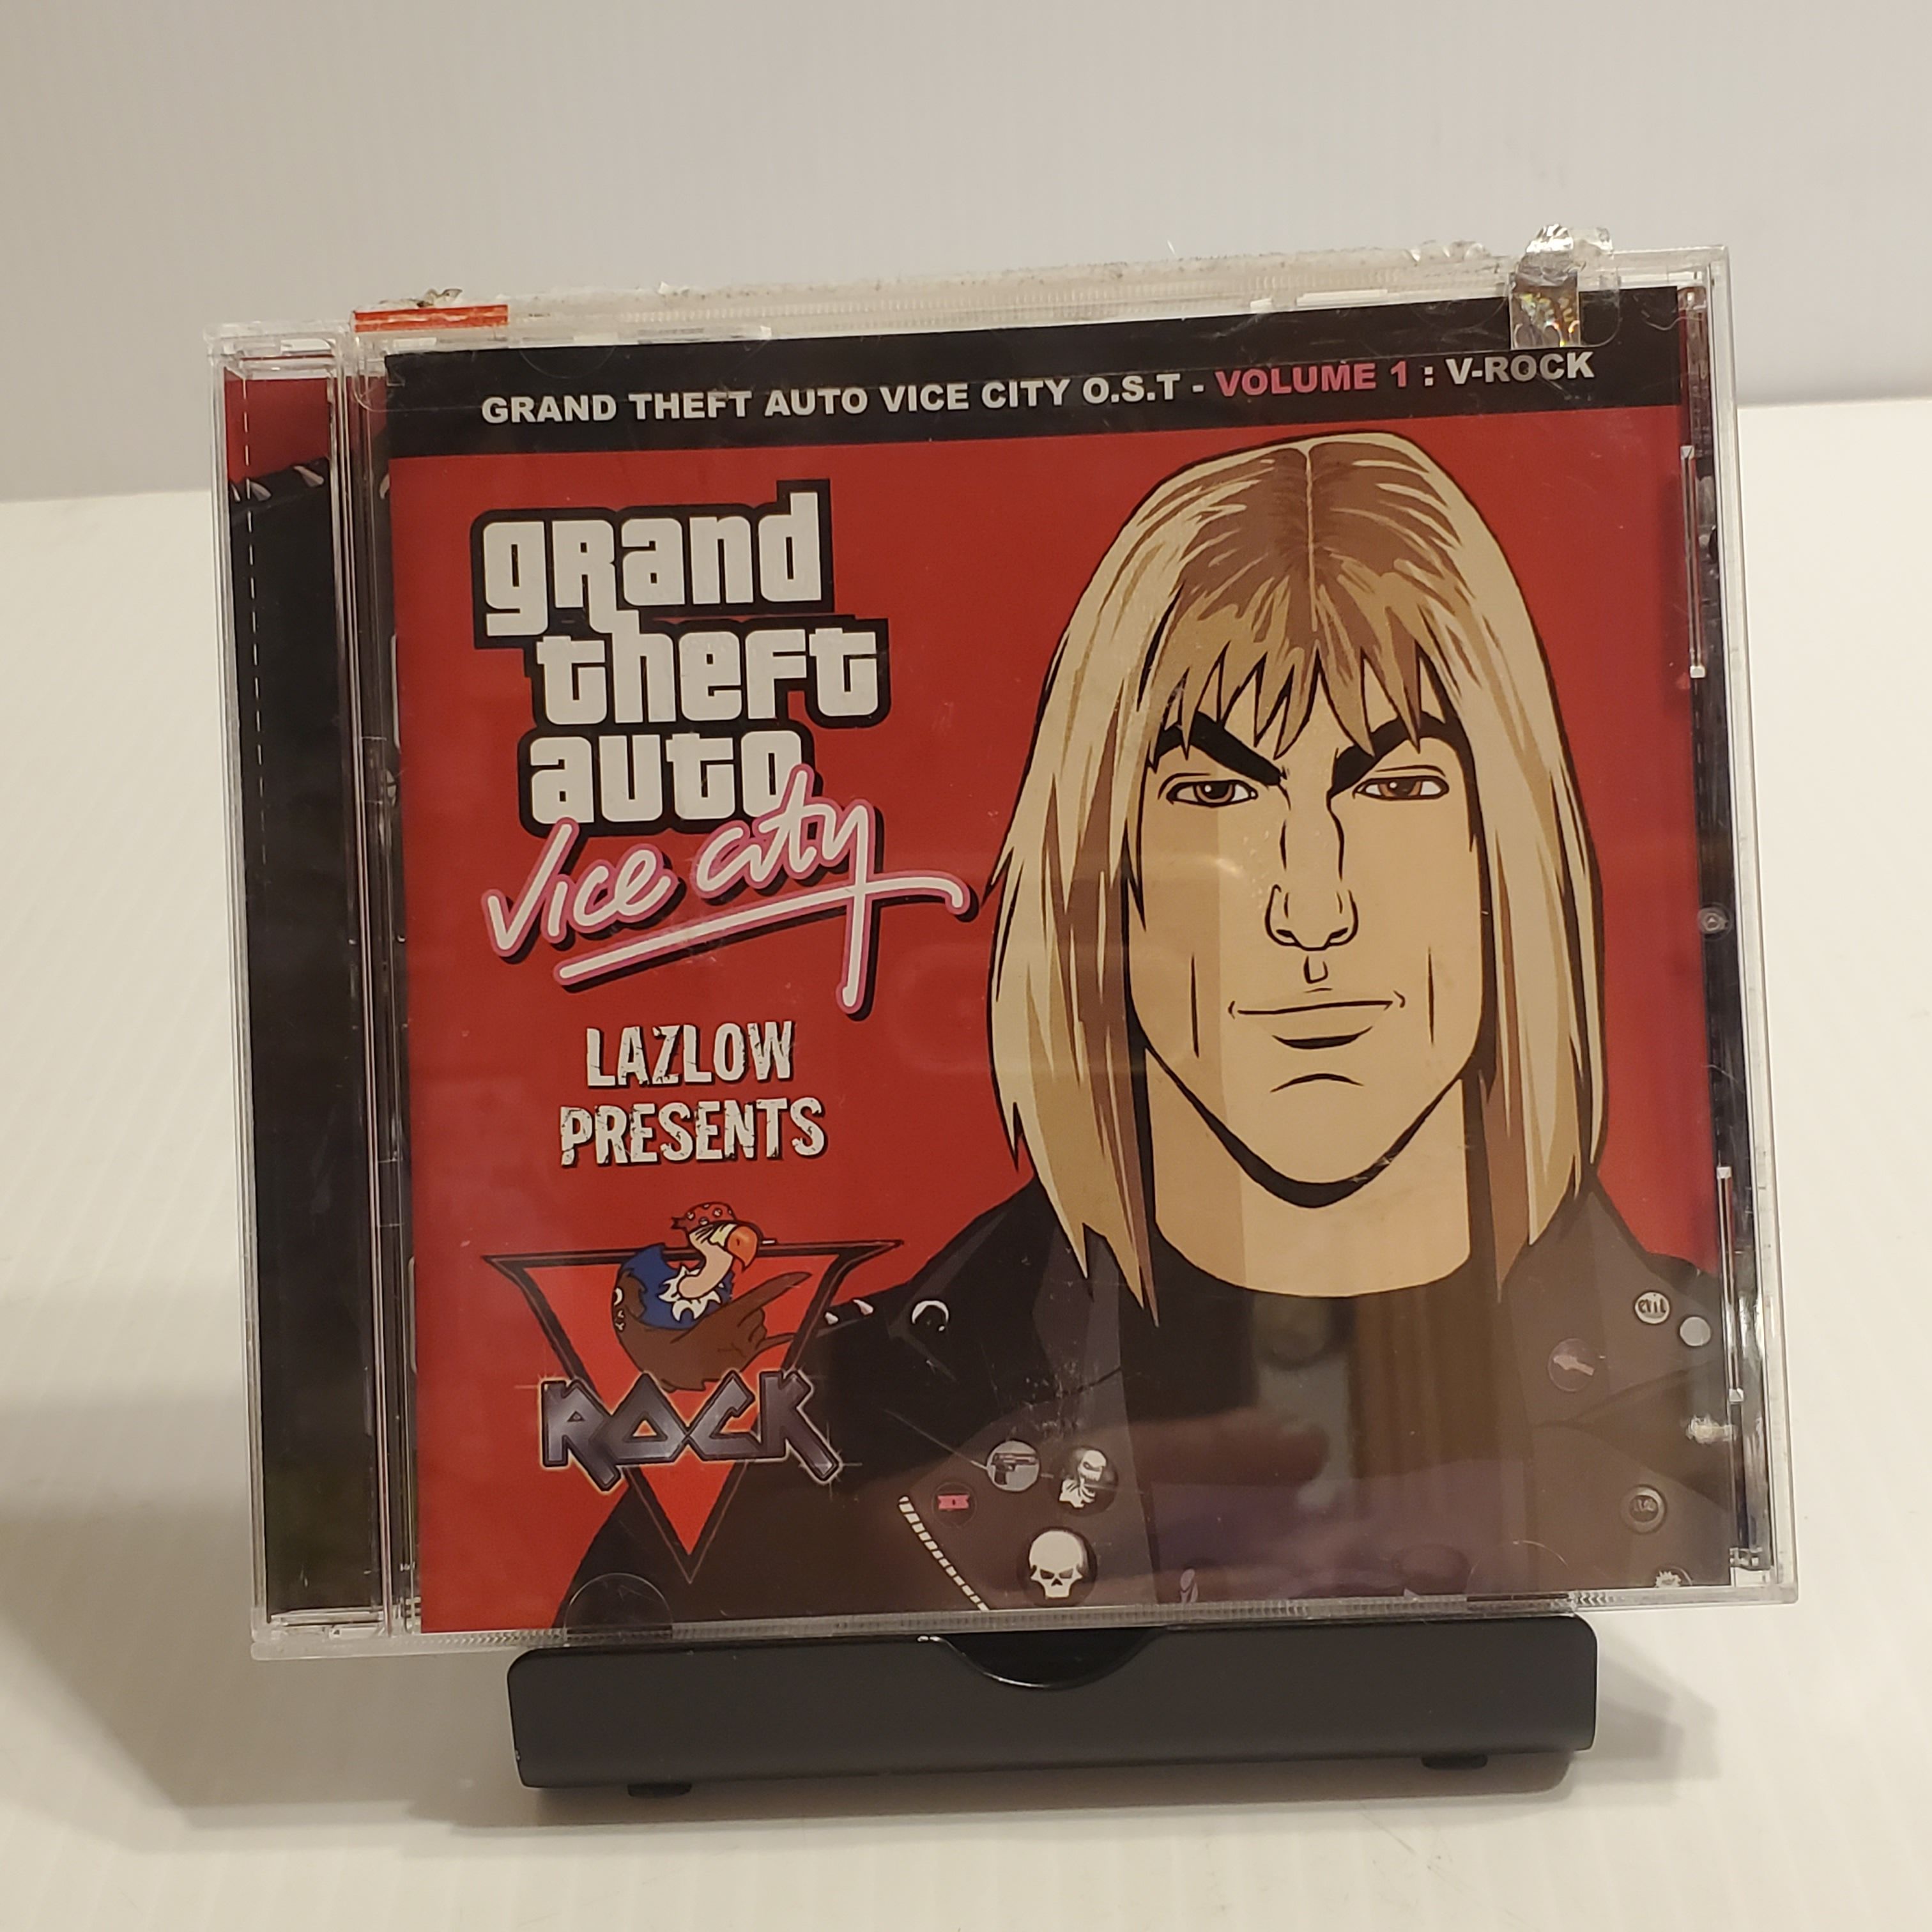 Grand Theft Auto Vice City CD Vol. 1 V-Rock by Various Artists. UPC 696998700222. Pre-owned, very good shape.